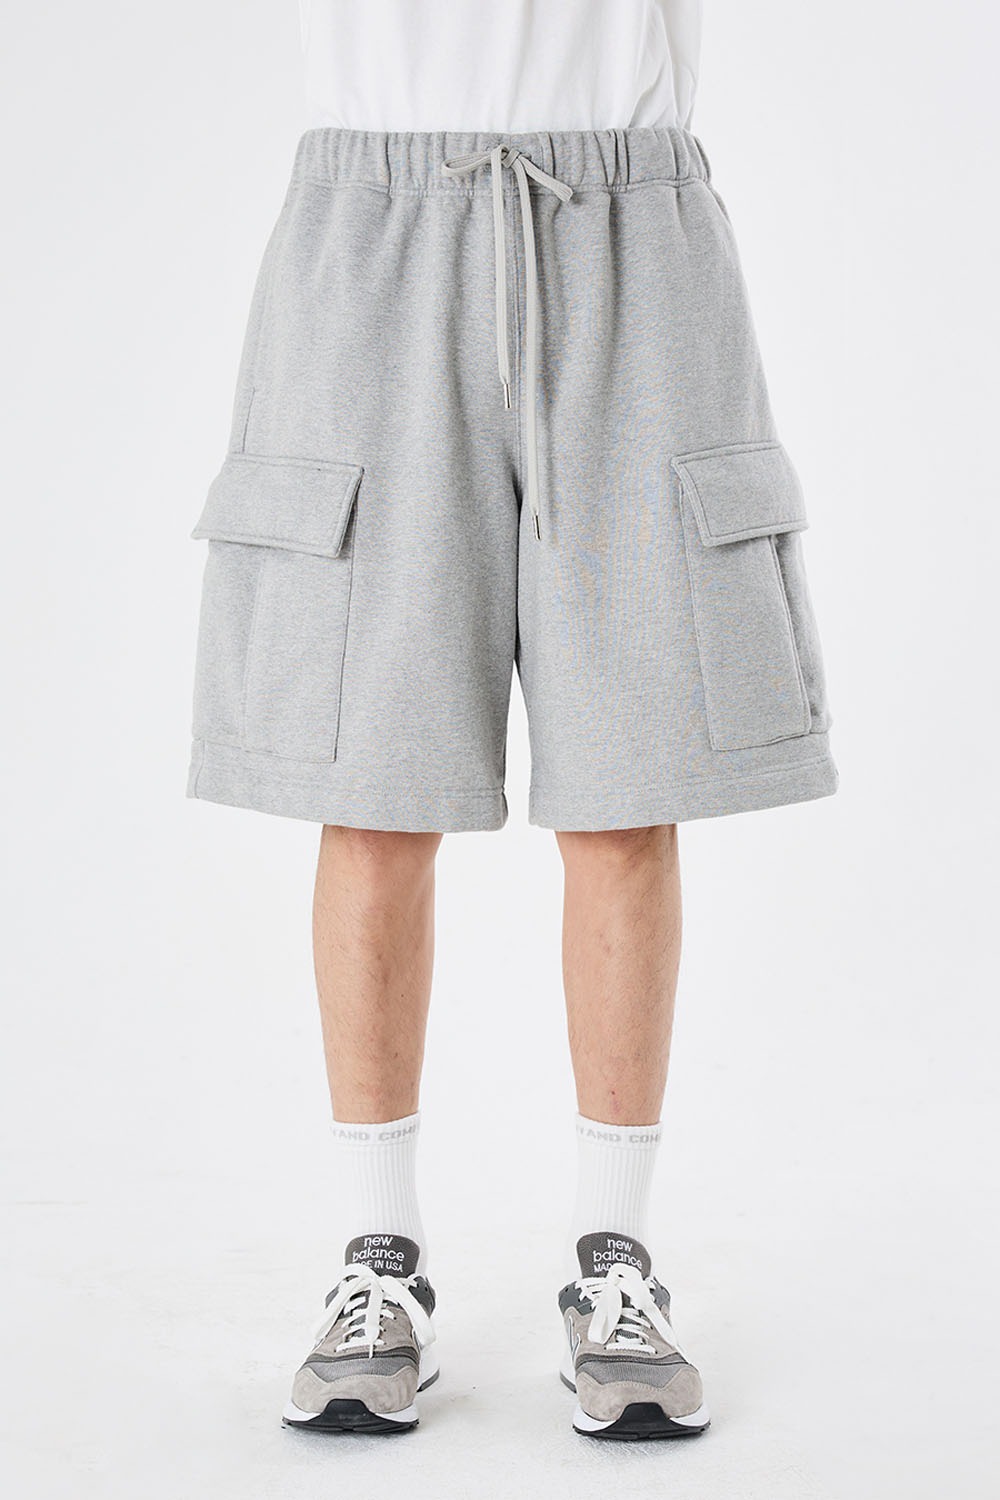 Over Mil Sweat Shorts-Heather Gray